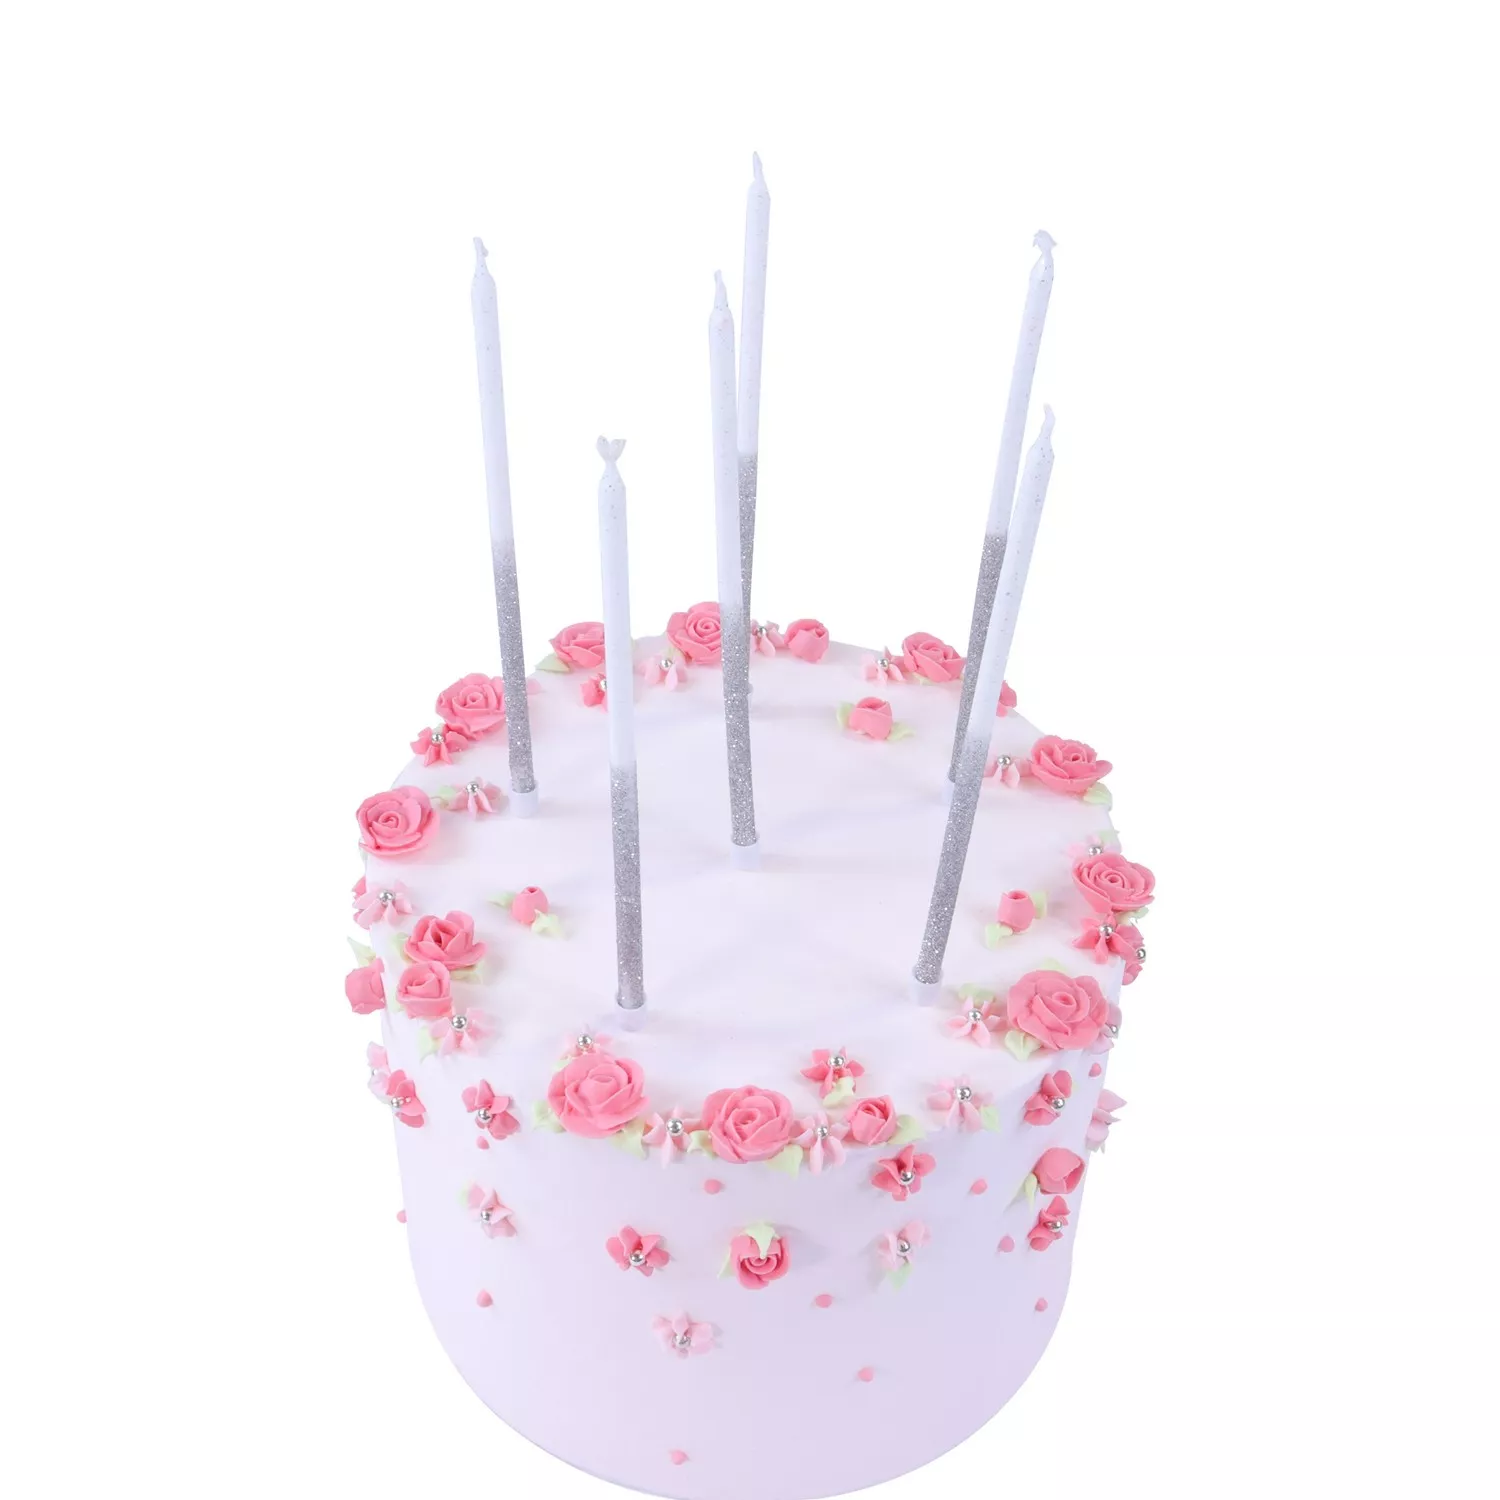 PME Tall Glitter Candles, Set of 16